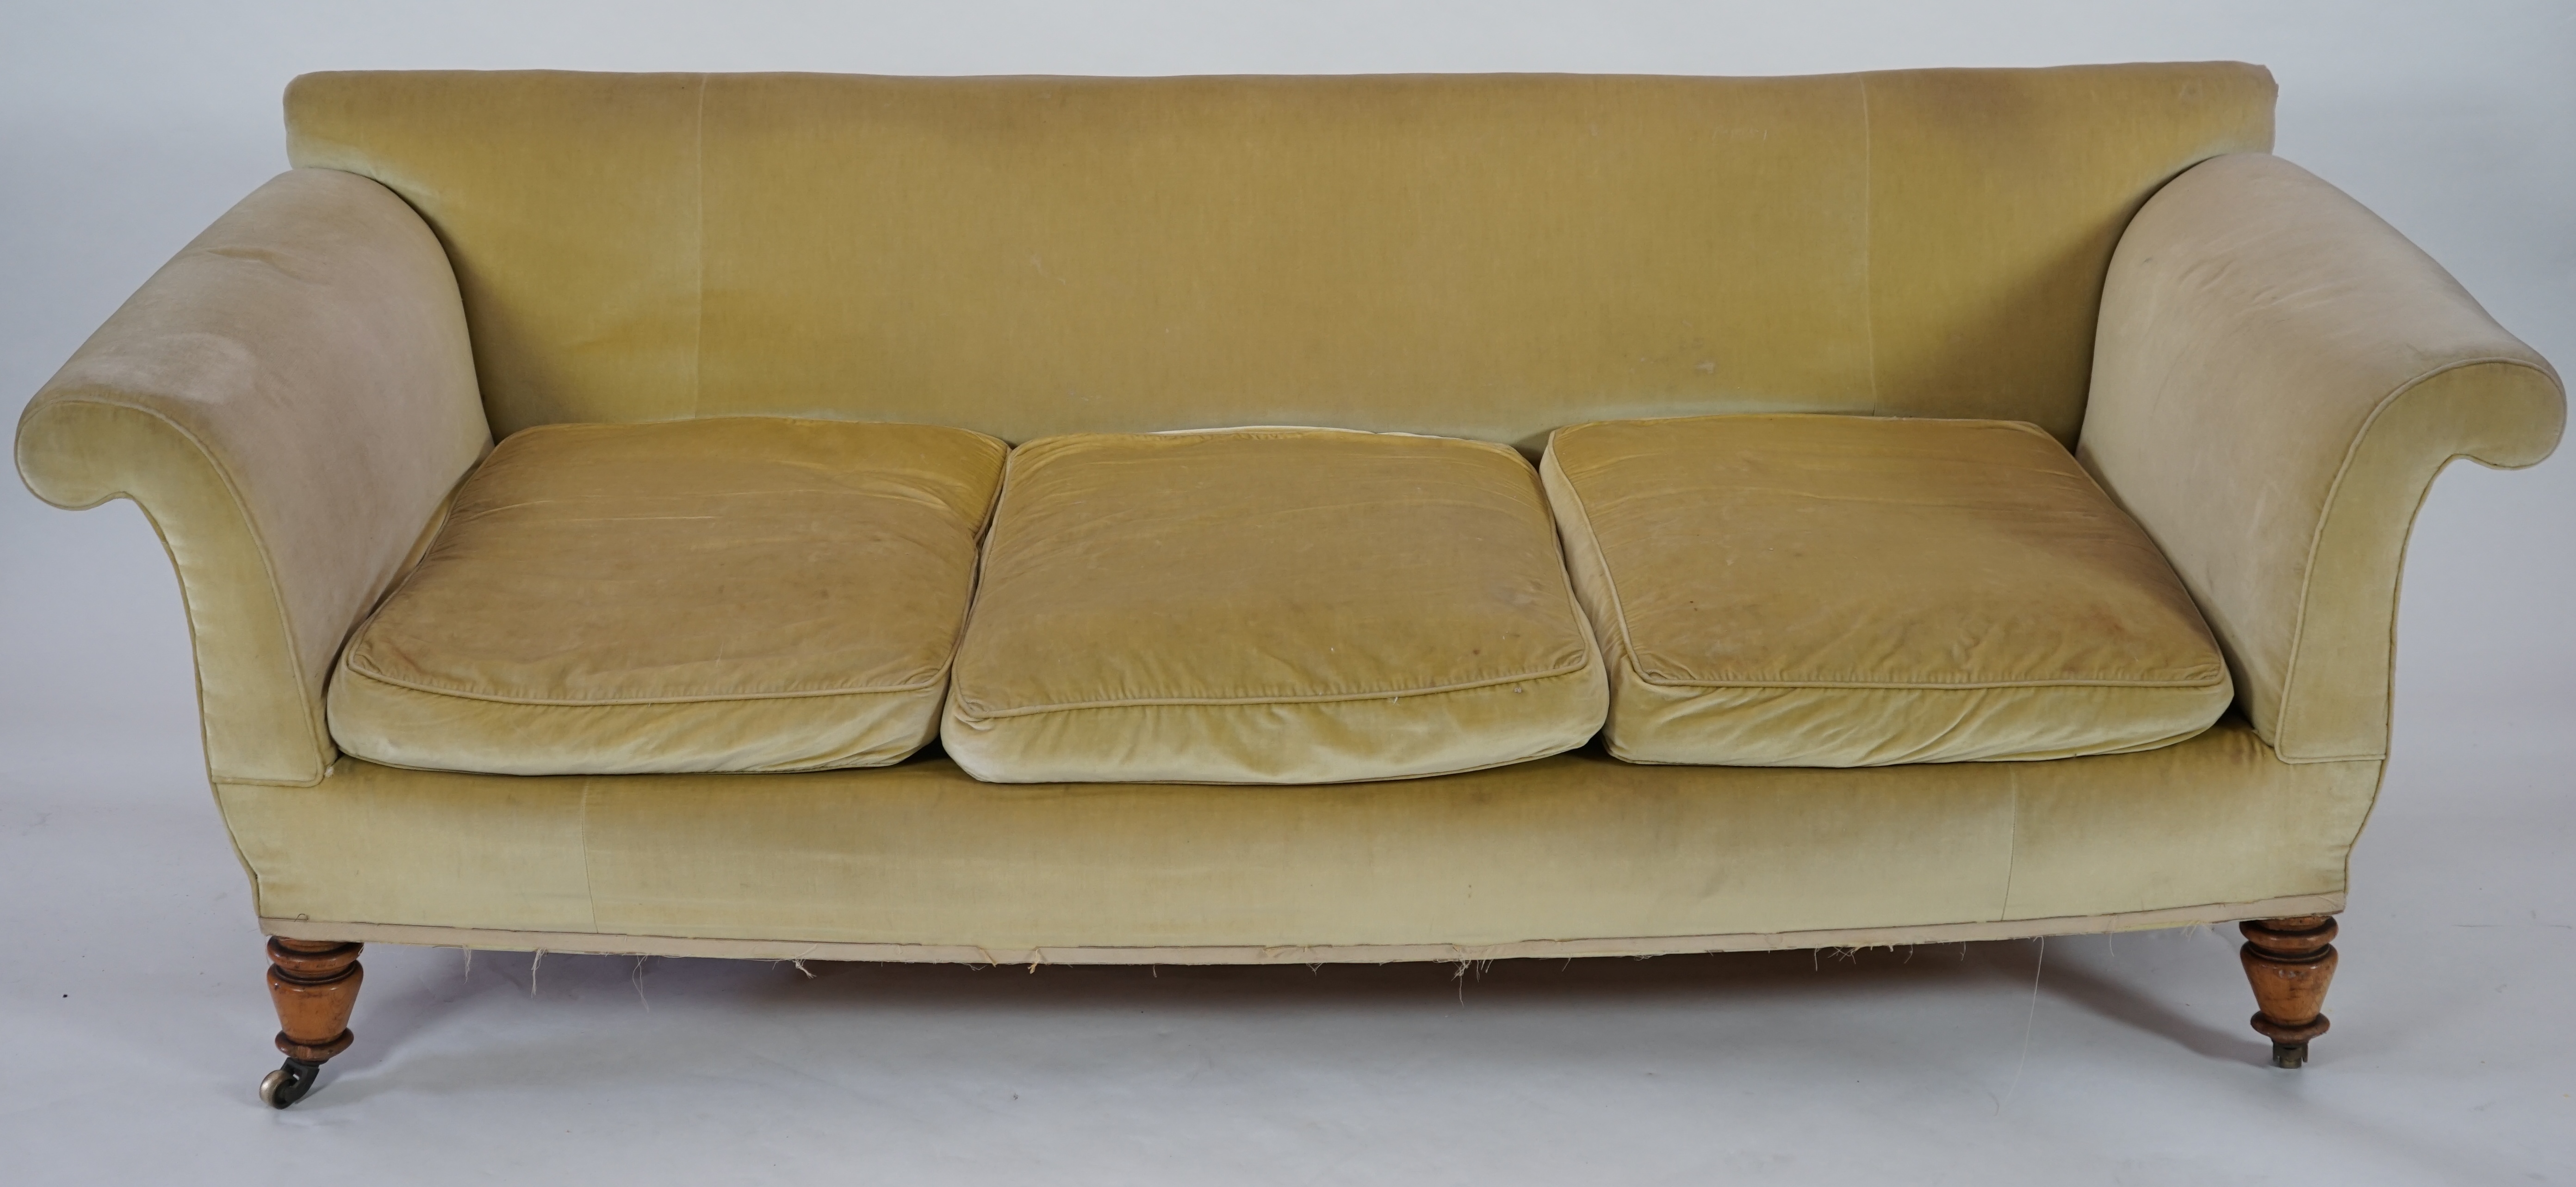 A large Victorian sofa, in the manner of Howard & Sons